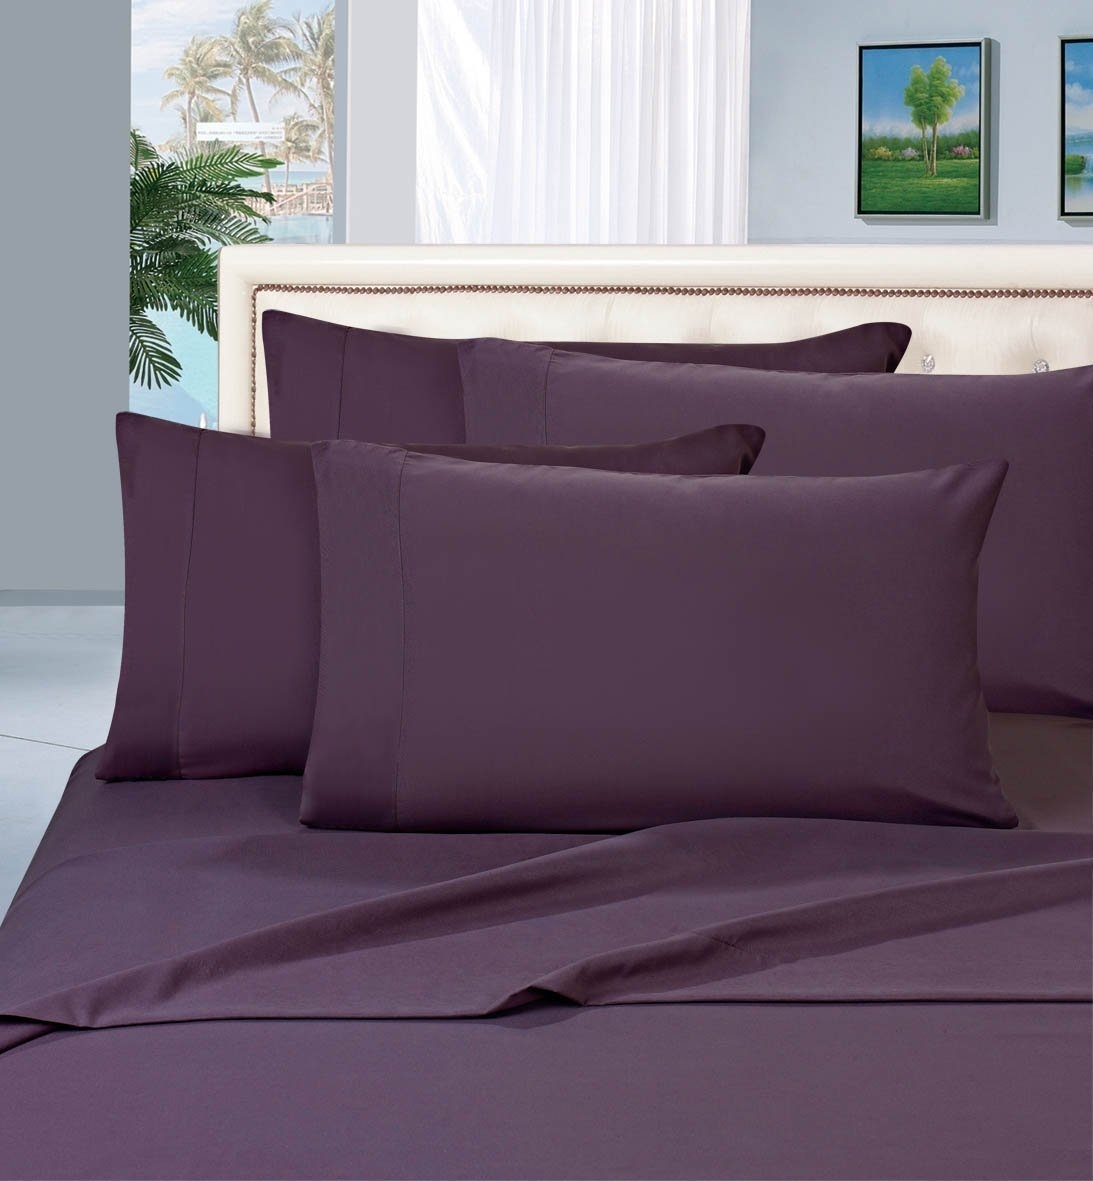 Elegant Comfort 1500 Series Wrinkle Resistant Egyptian Quality Hypoallergenic Ultra Soft Luxury 4-piece Bed Sheet Set, Queen, Purple